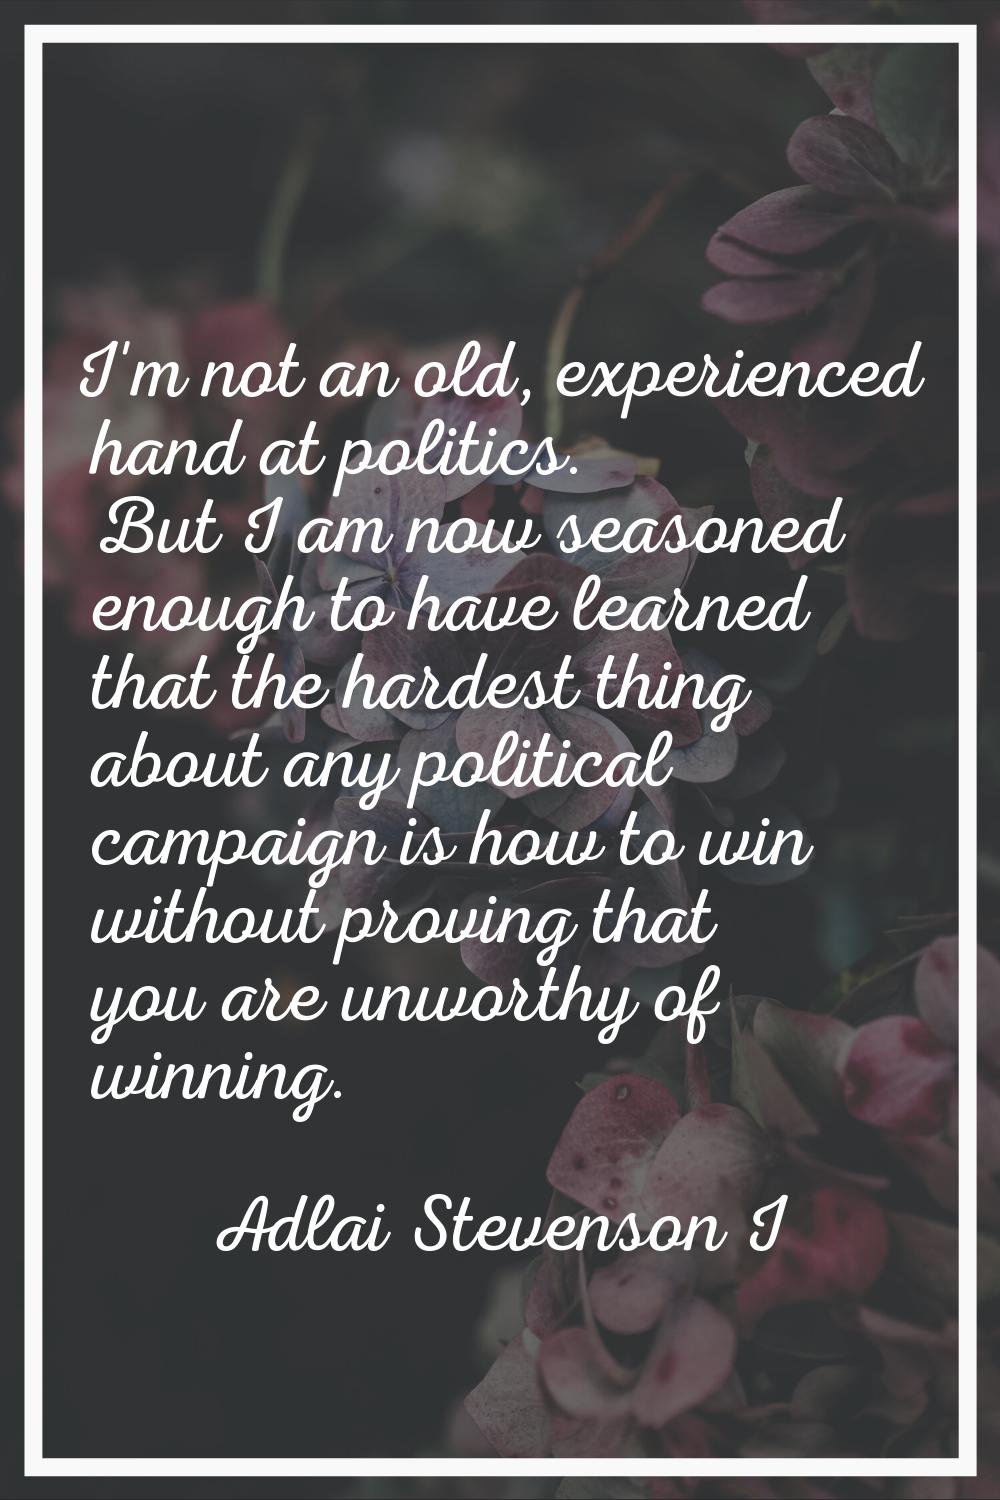 I'm not an old, experienced hand at politics. But I am now seasoned enough to have learned that the